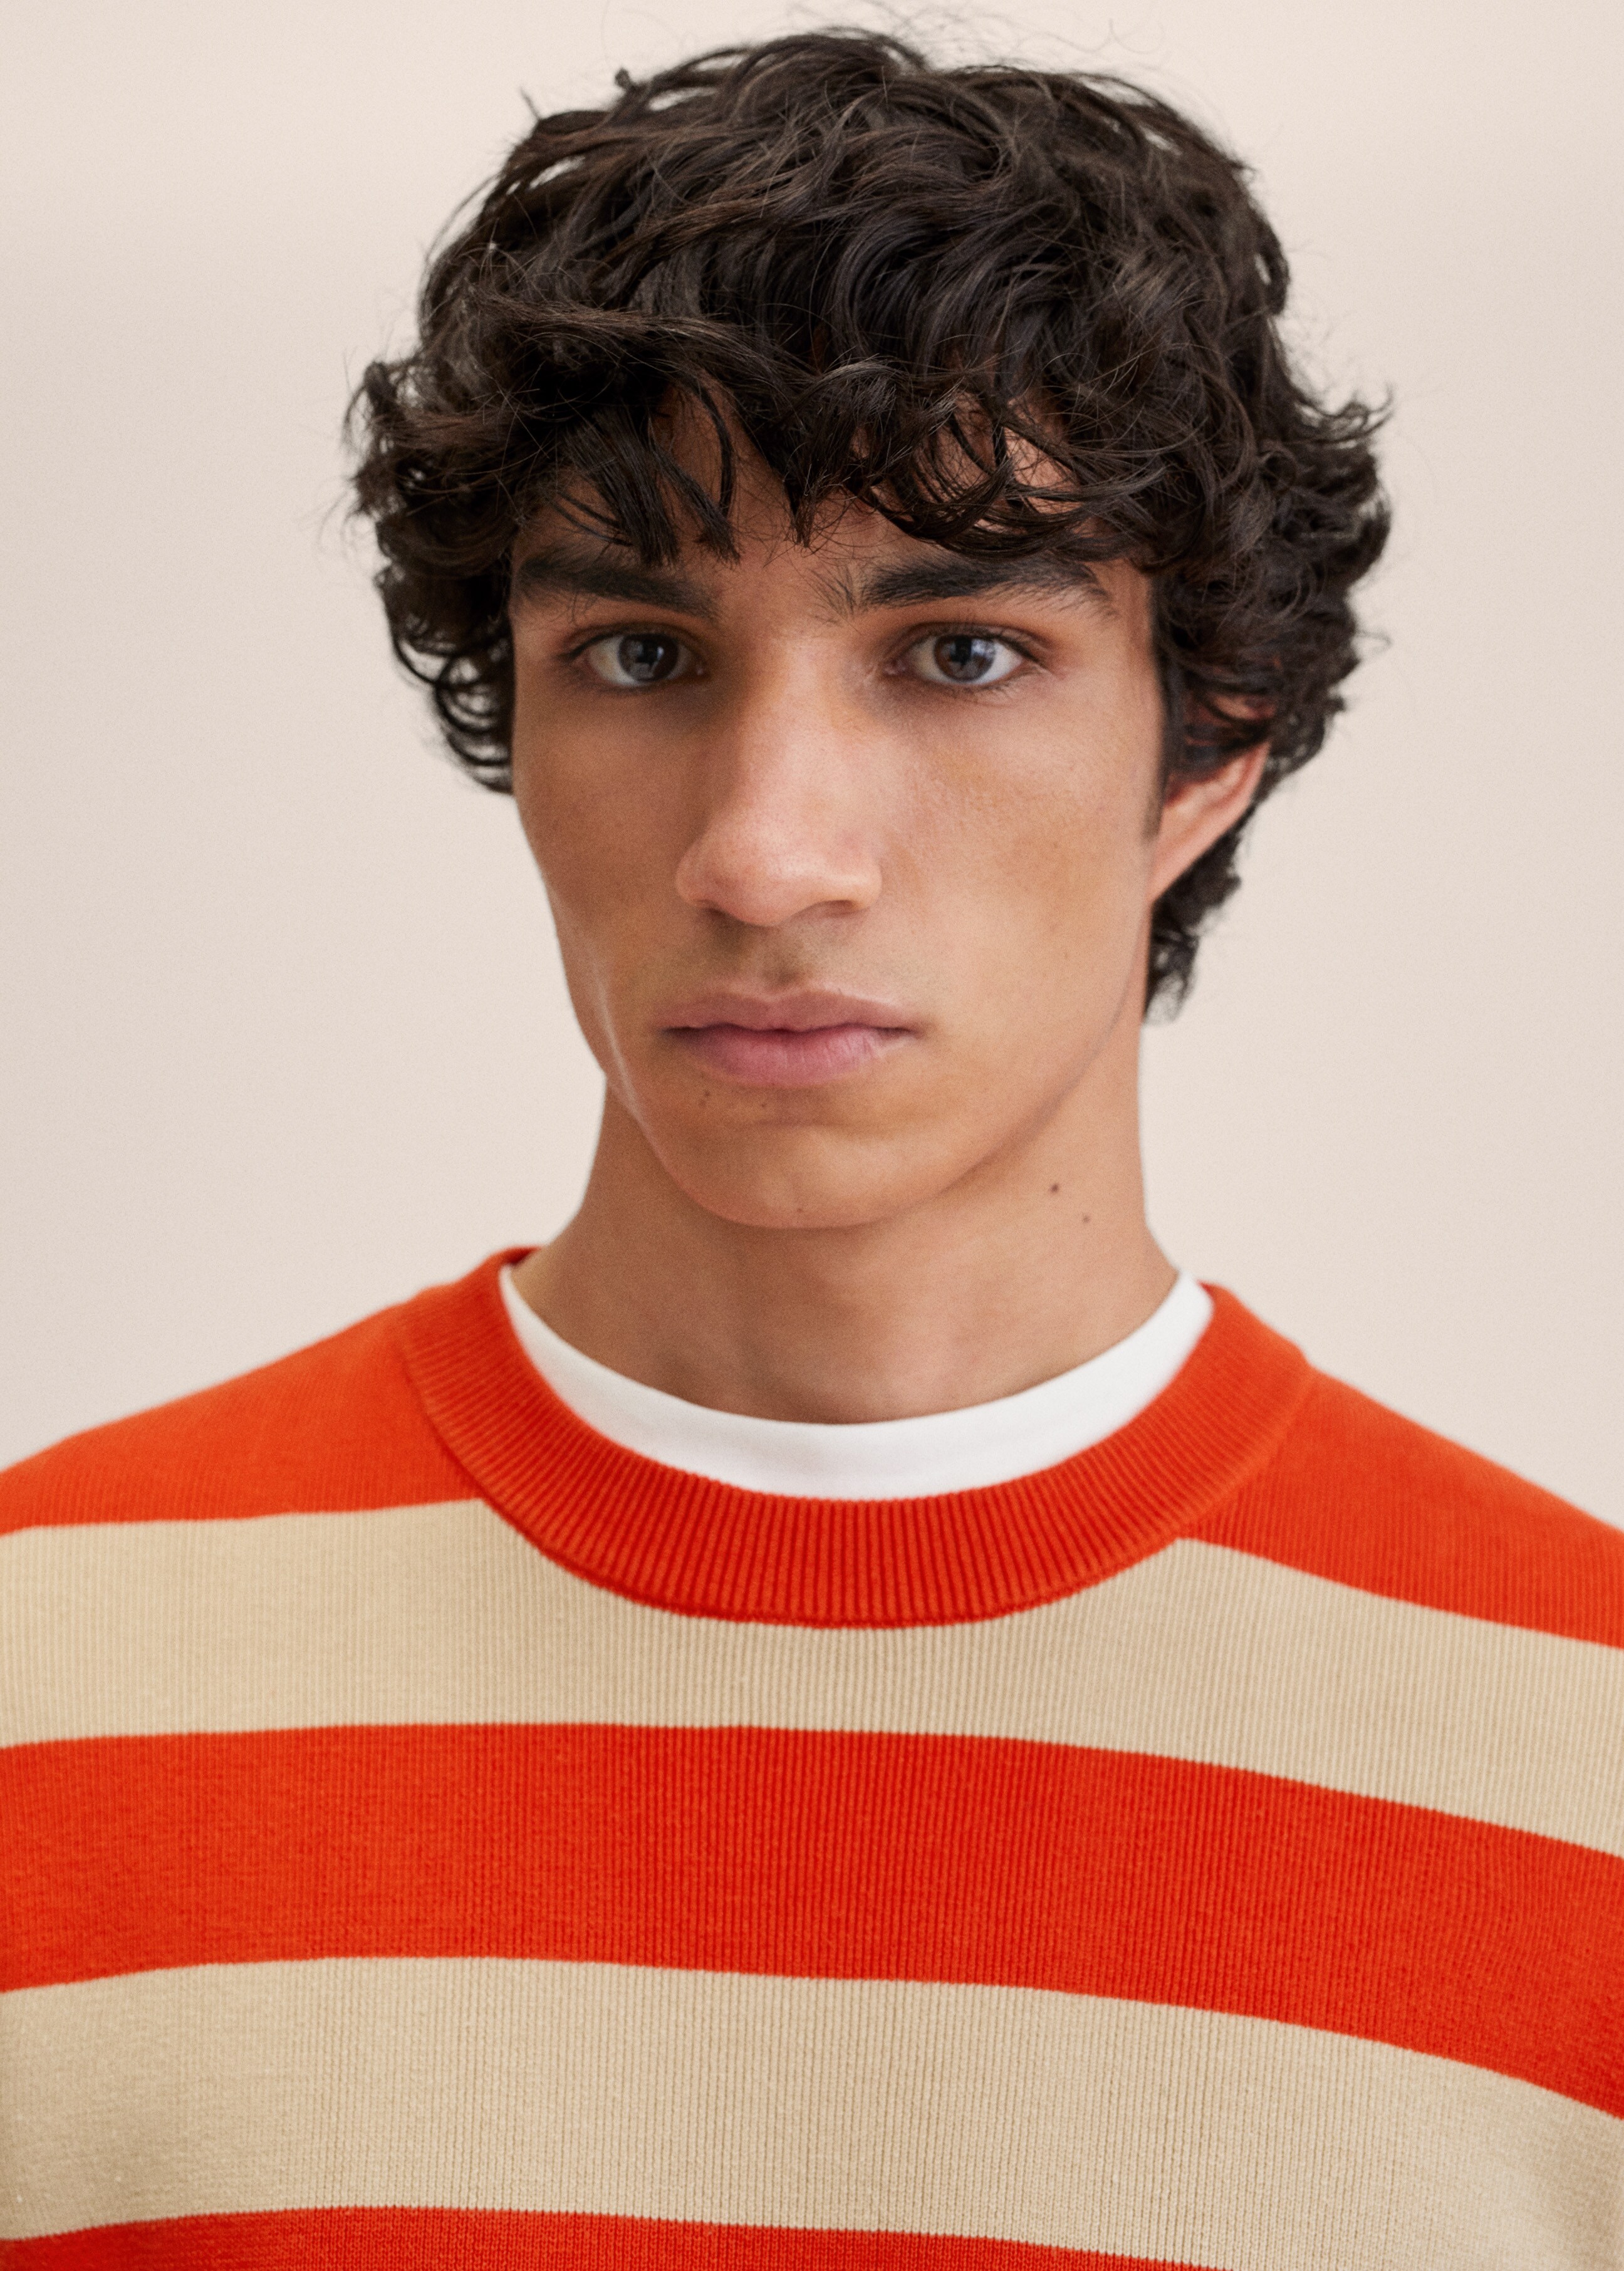 Striped cotton sweater - Details of the article 1